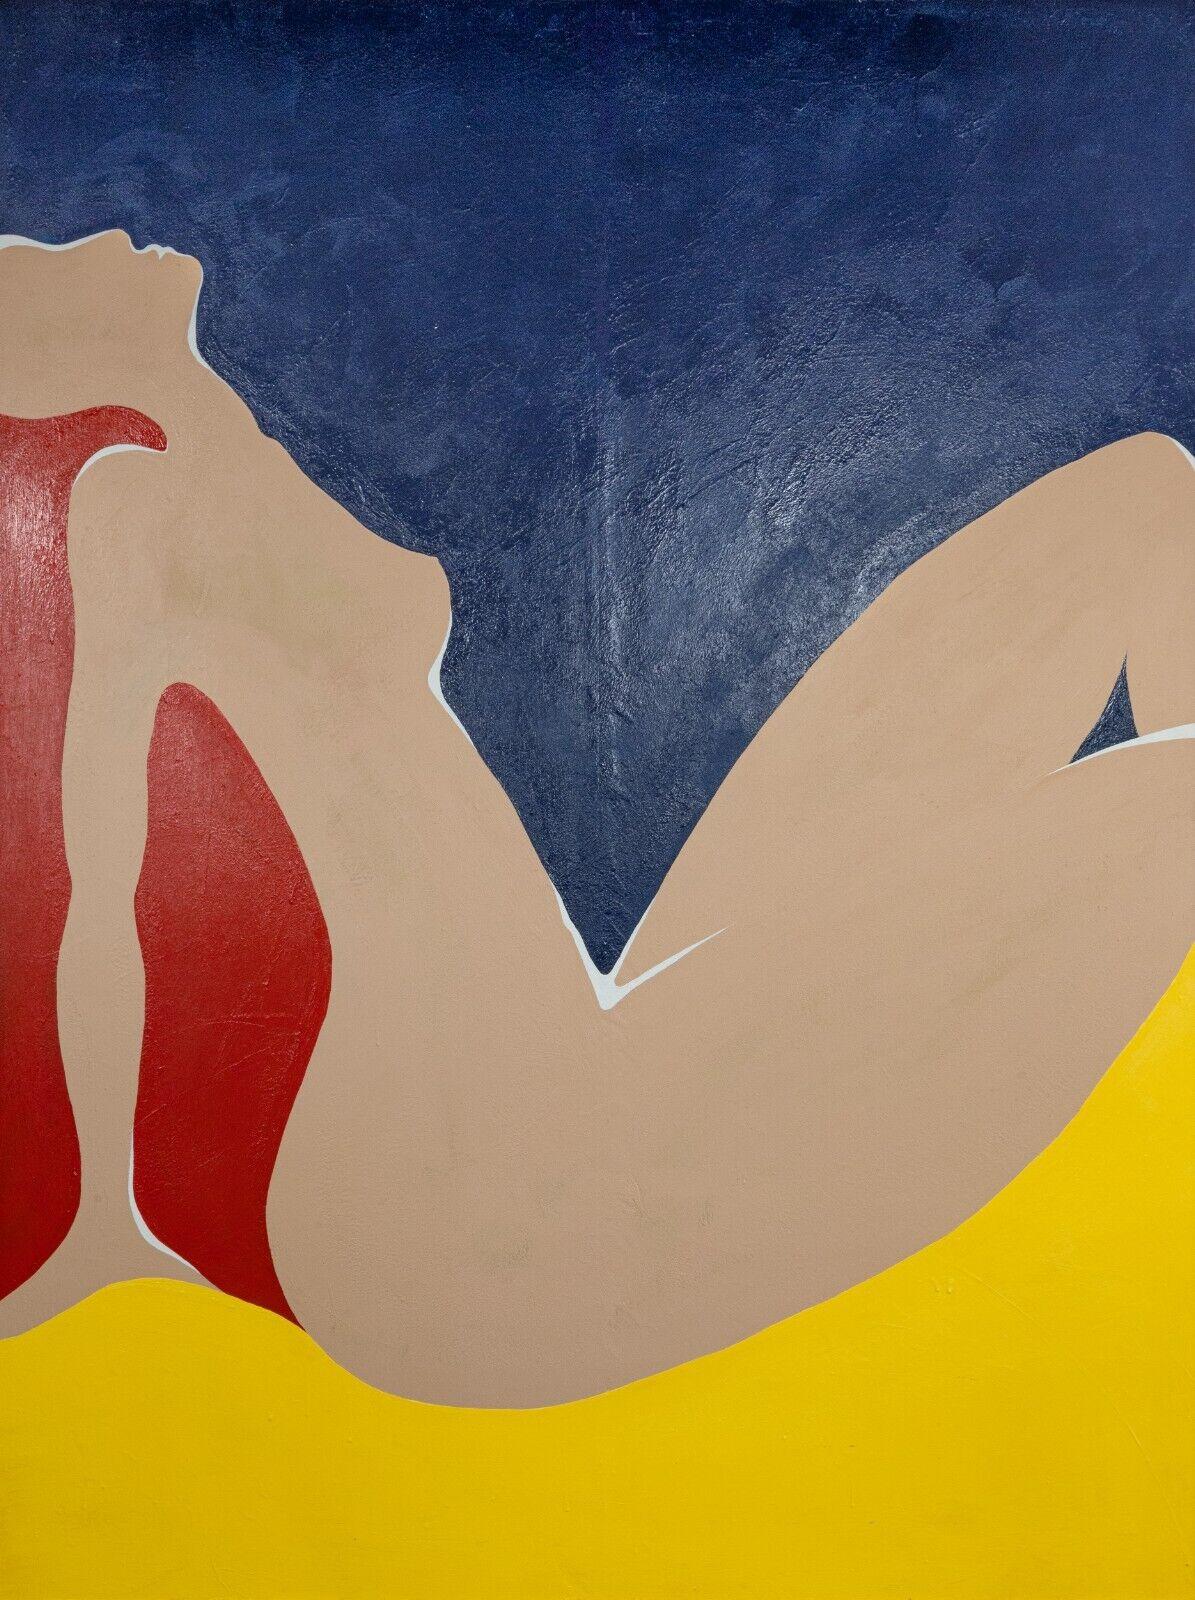 A monumental unique acrylic painting on board by international artist Dominic Pangborn. An elegant yet modern nude is depicted in primary colors which creates a bold and bright statement. The graphic design is reminiscent to the nudes by Tom